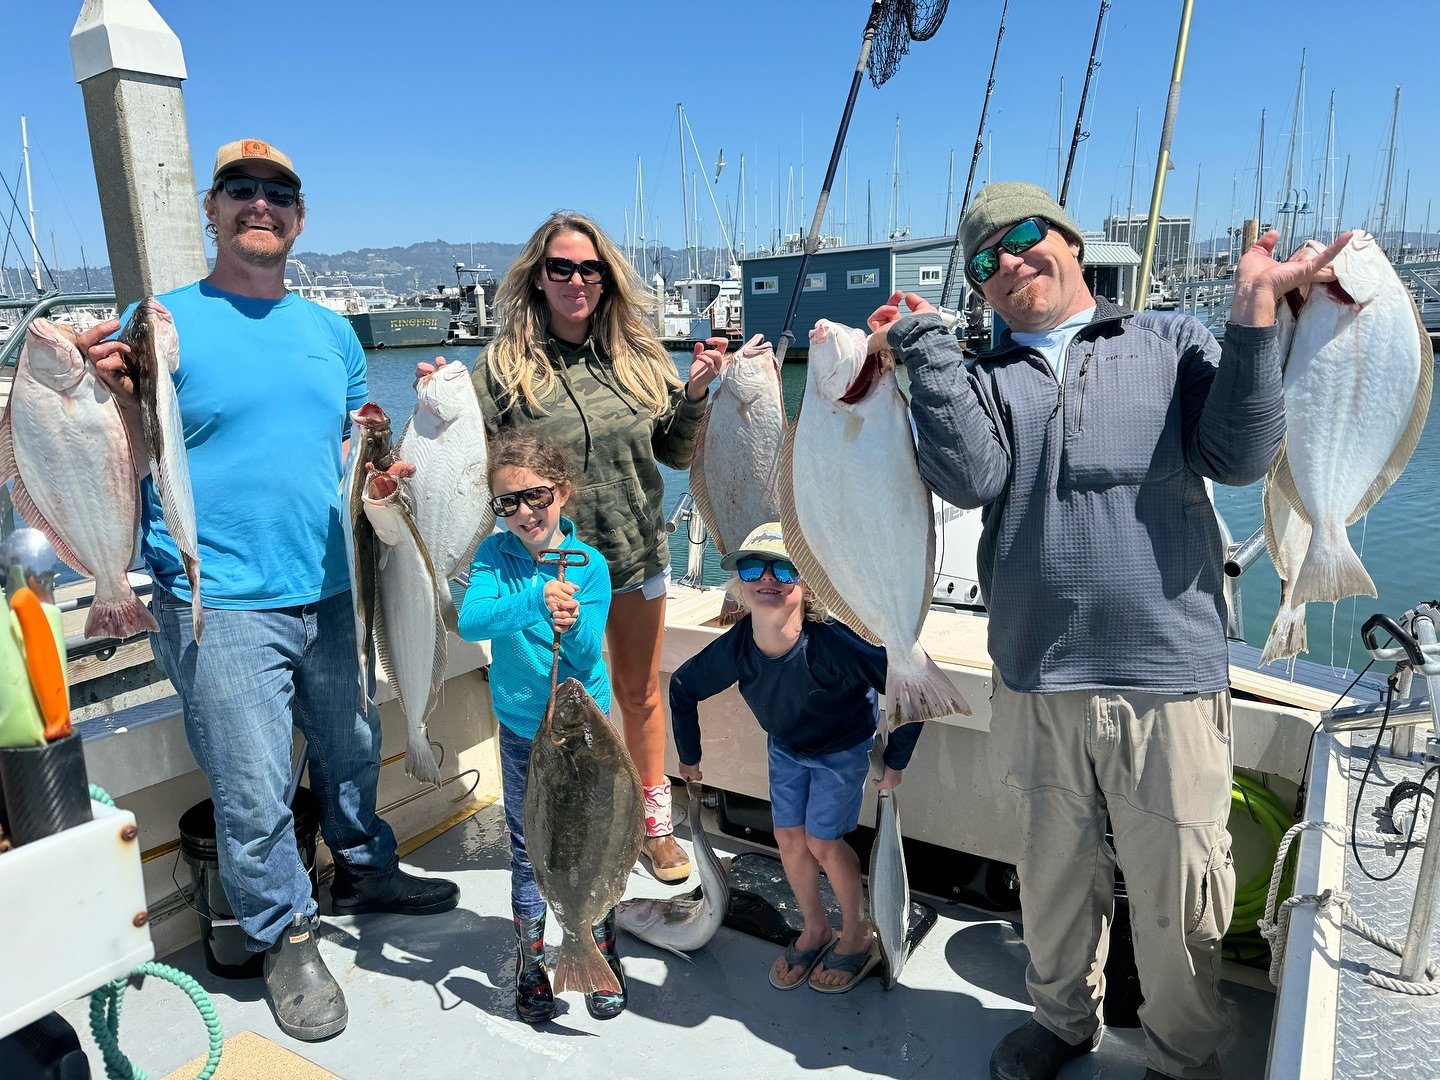 Am limits for our clients today!!! Call Capt Charlie to get out while the bite is hot!!! #goldenstateguideservice #scallywag #fishemeryville